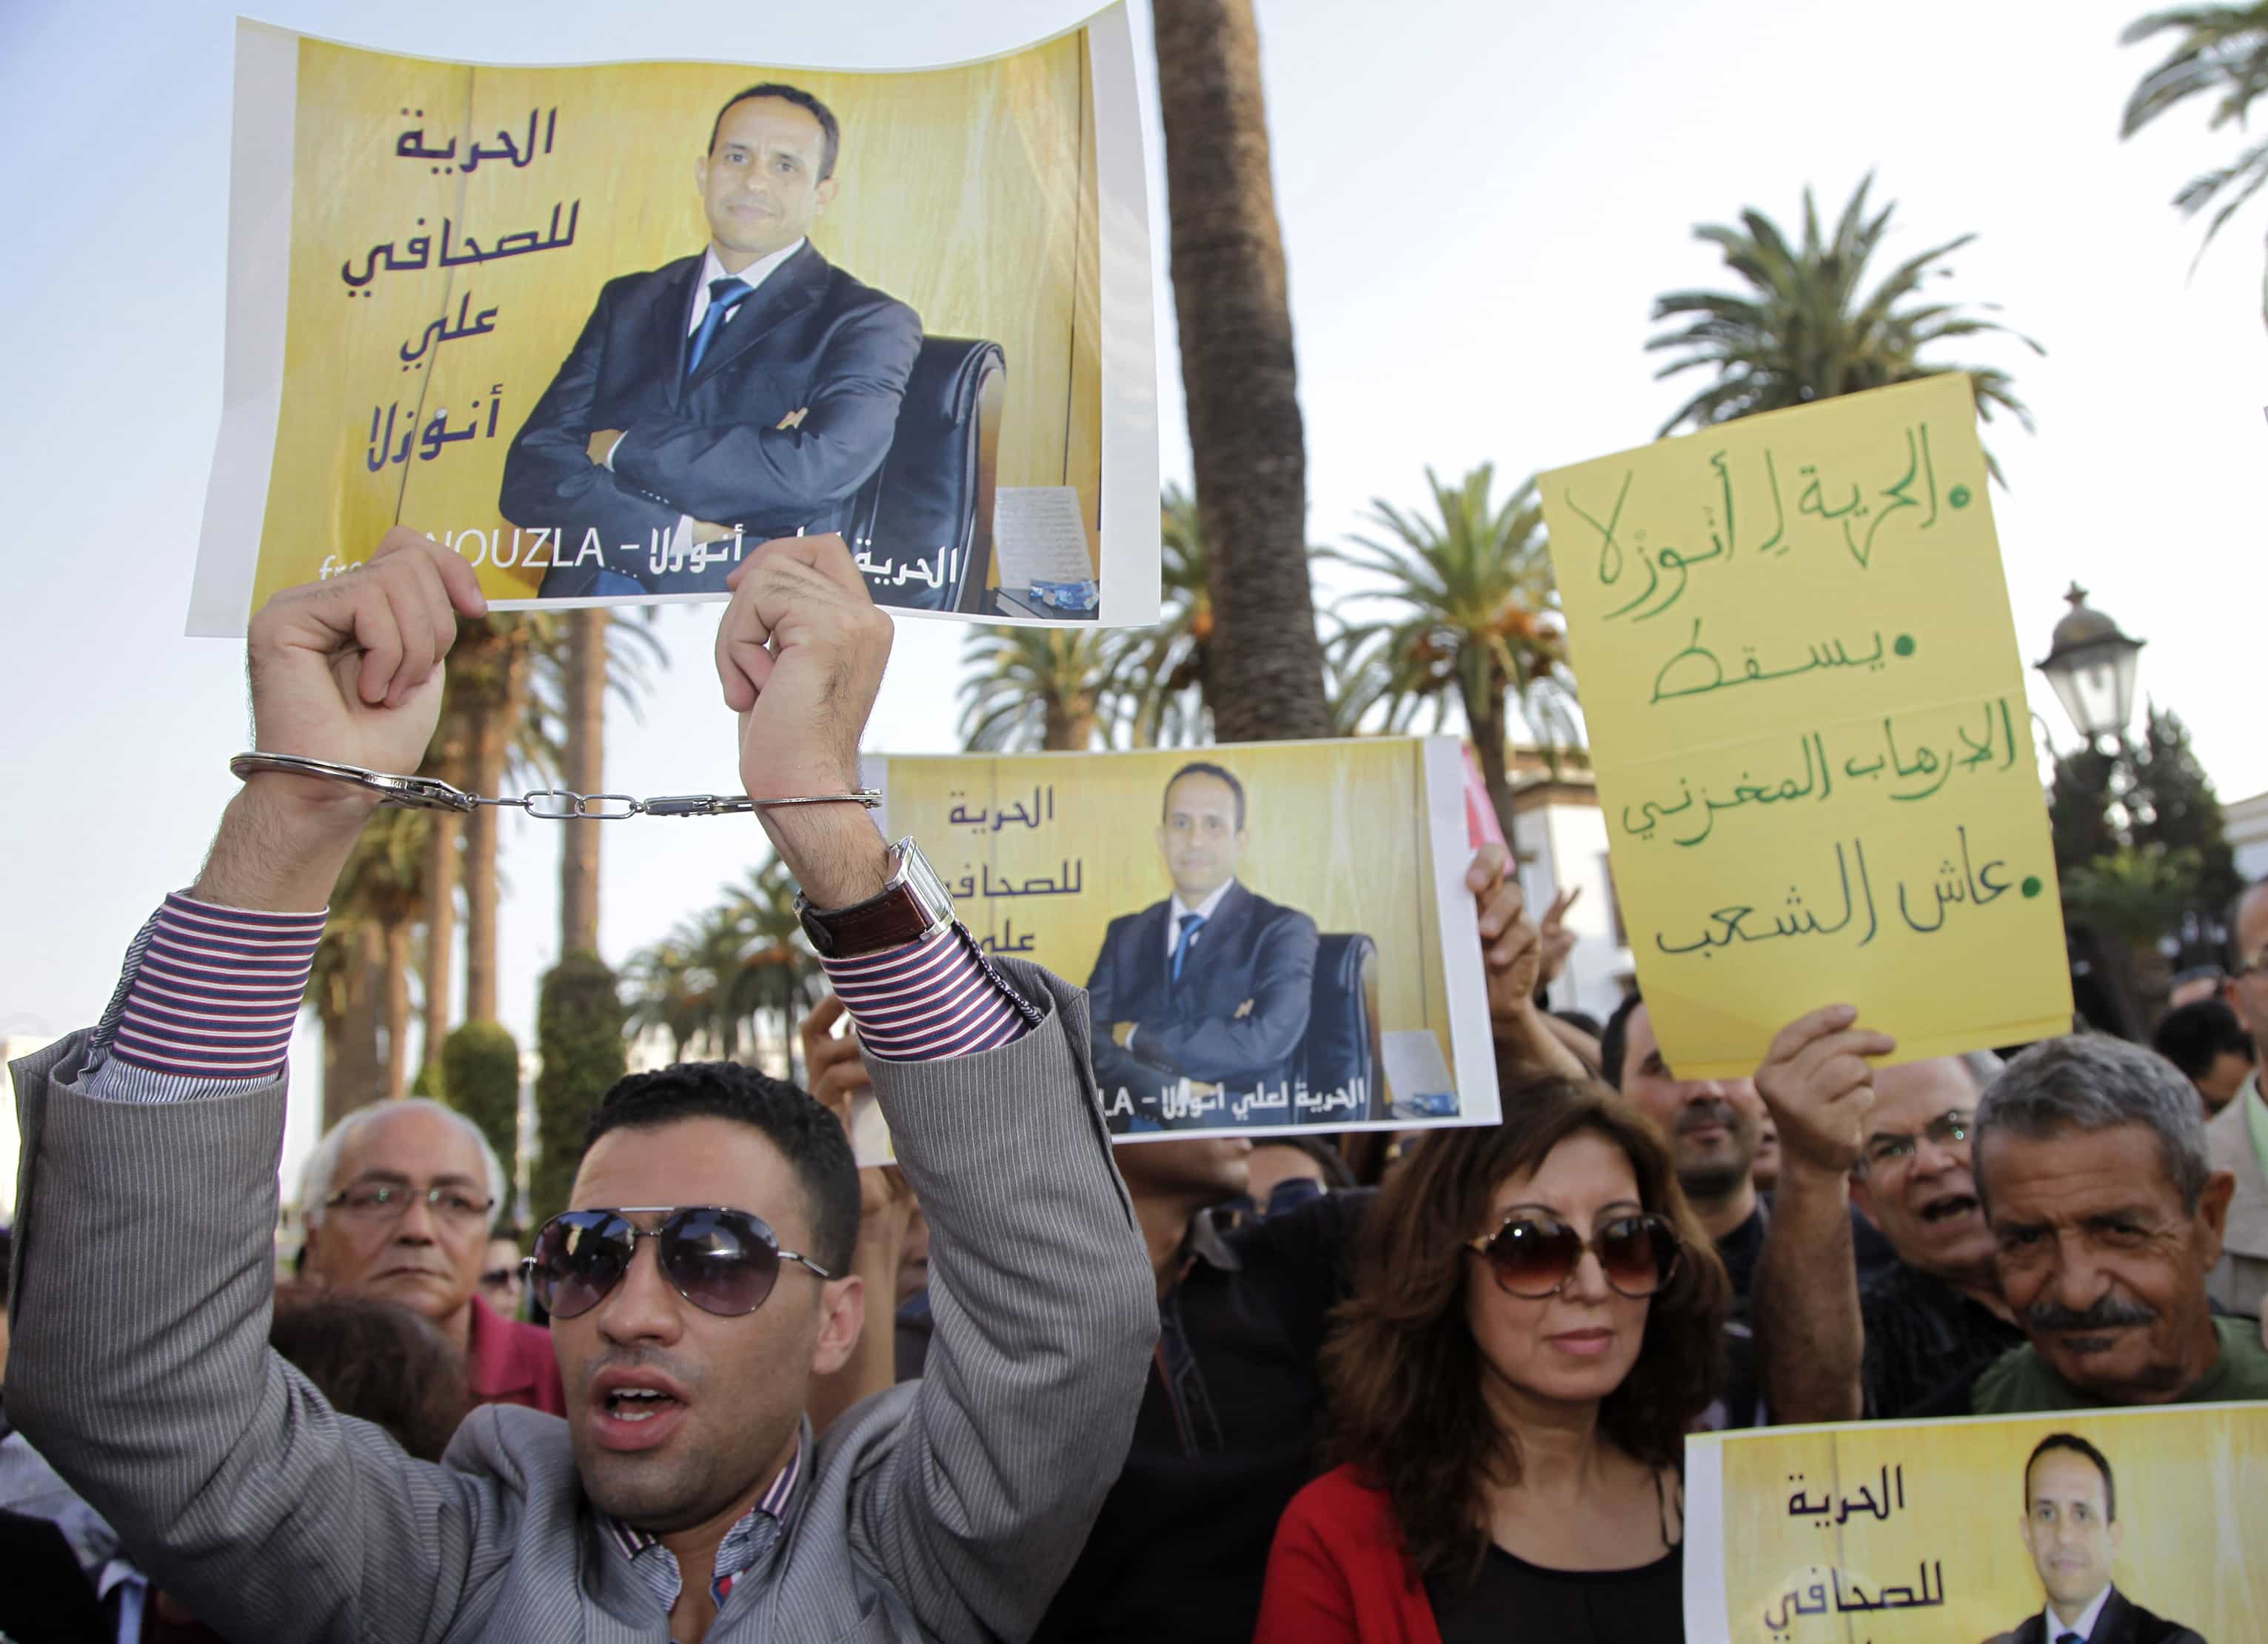 Demonstrators hold signs and posters of Moroccan editor Ali Anouzla during a protest against his arrest in Rabat on 26 September 2013, REUTERS/Stringer